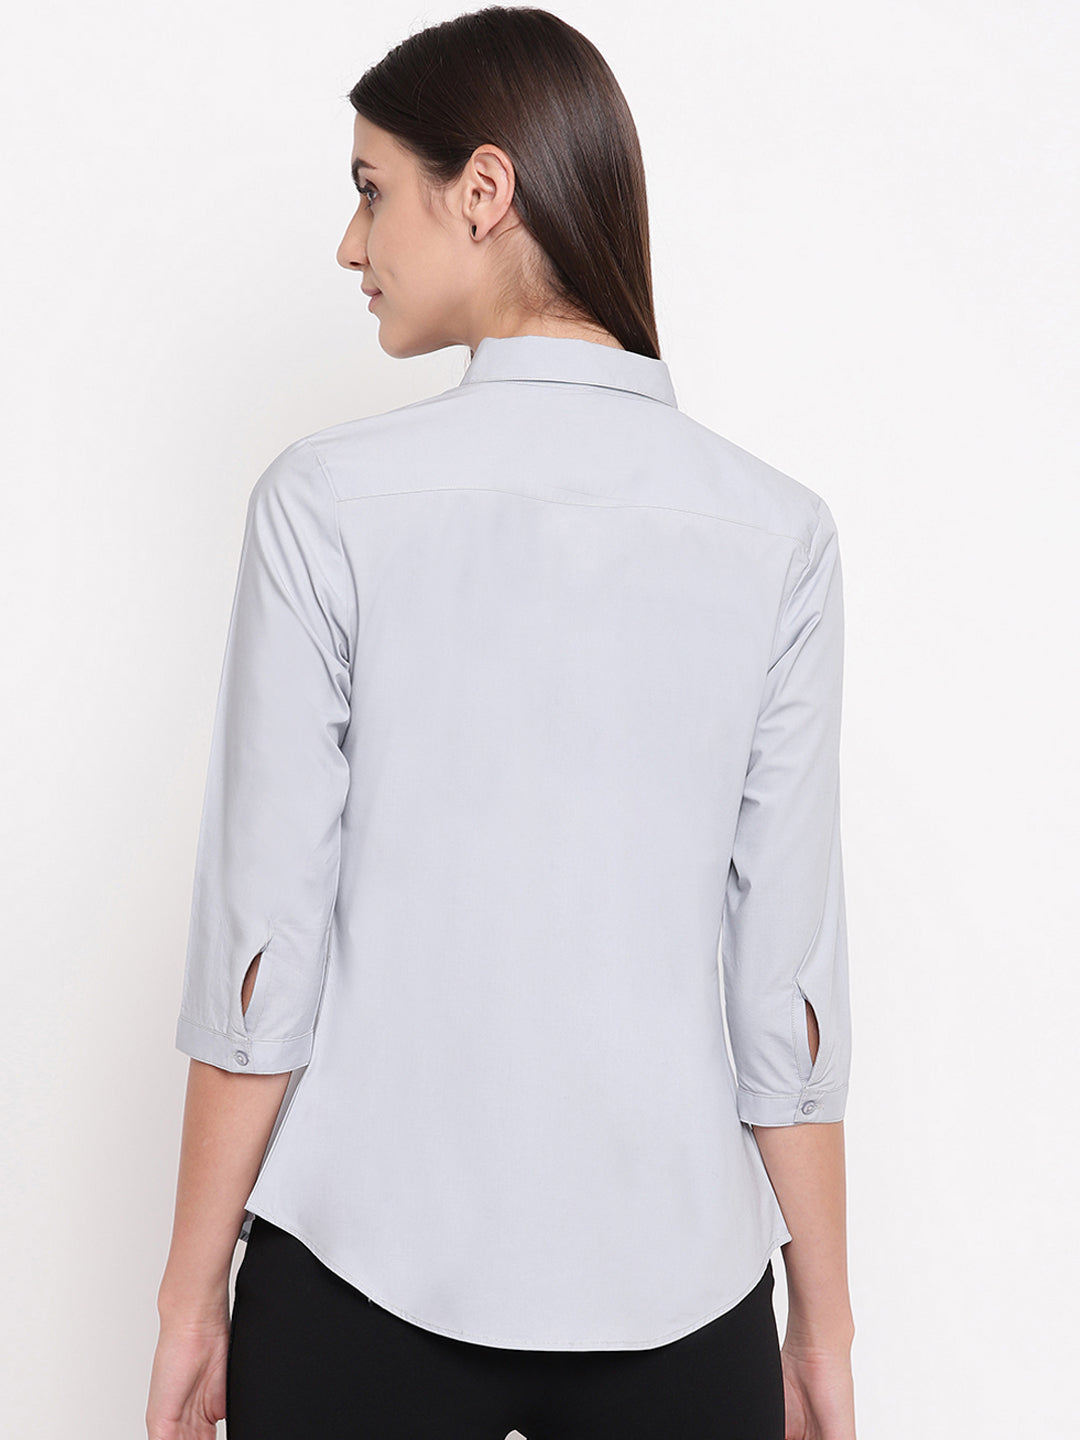 Women Grey Pure Cotton Solid Slim Fit Formal Shirt